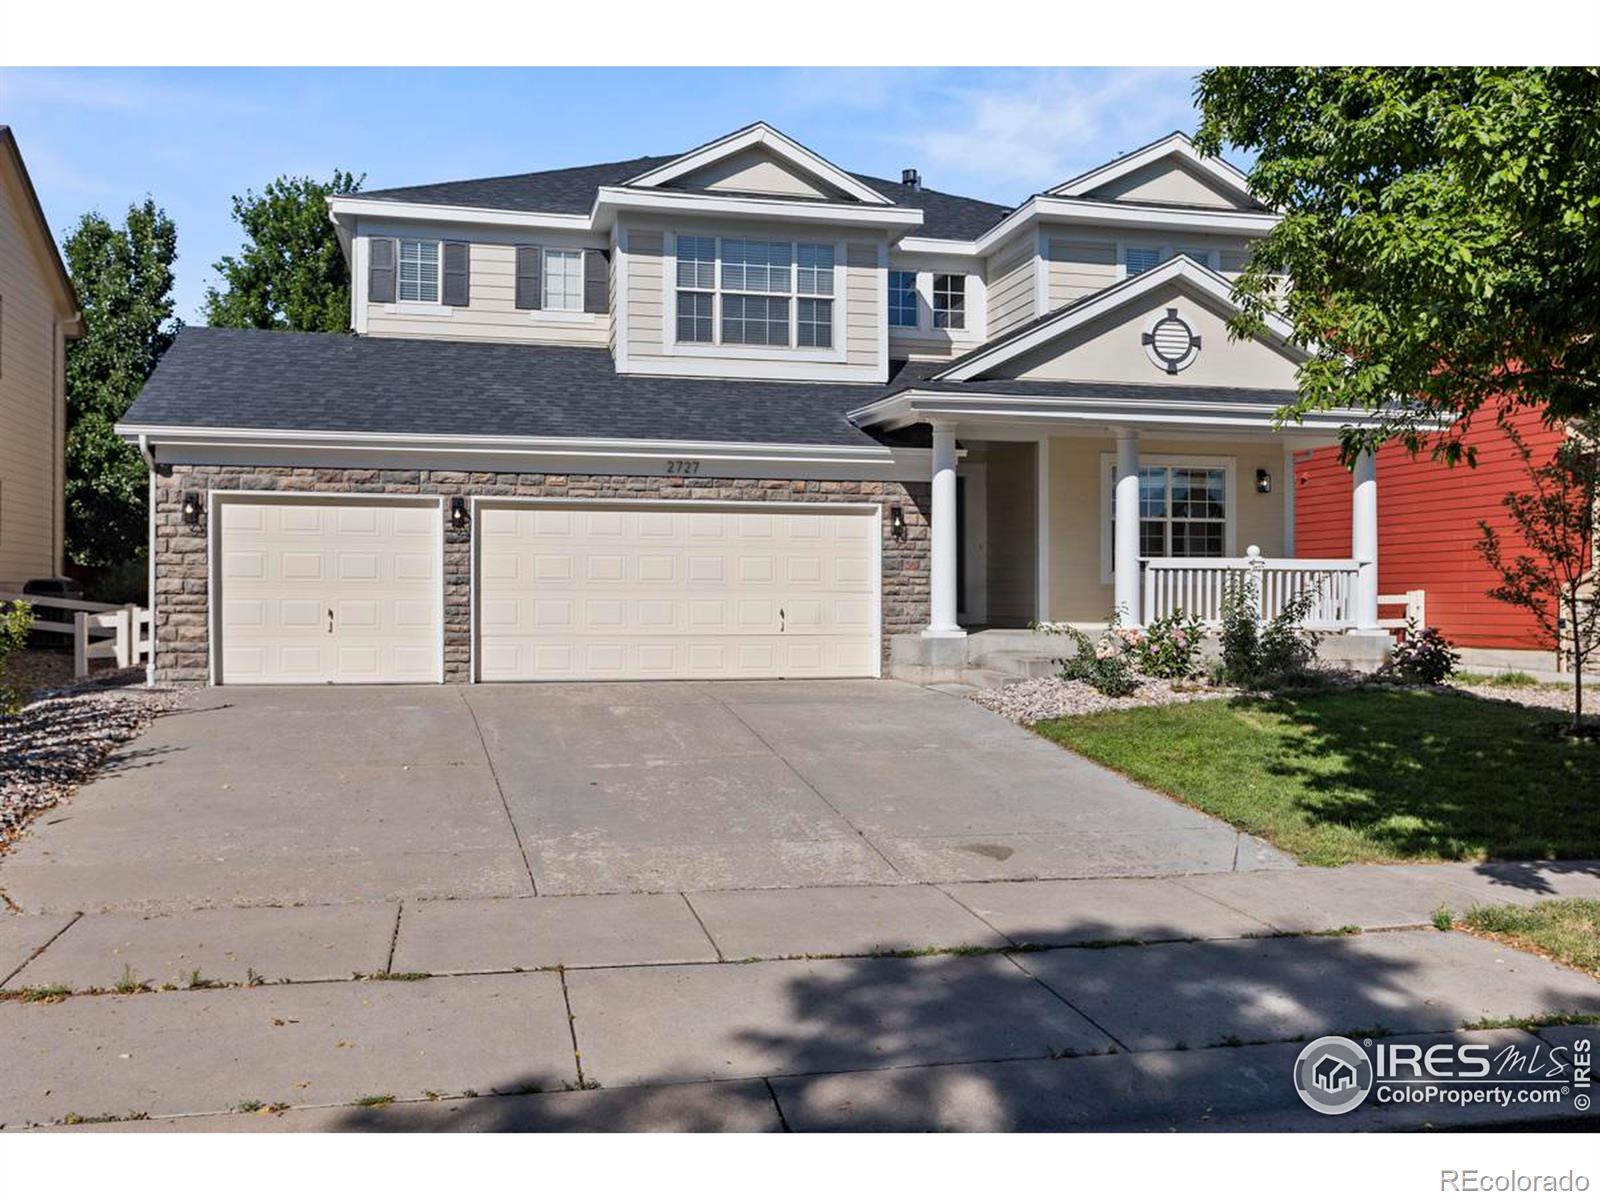 2727  Chase Drive, fort collins MLS: 456789993427 Beds: 5 Baths: 4 Price: $765,000